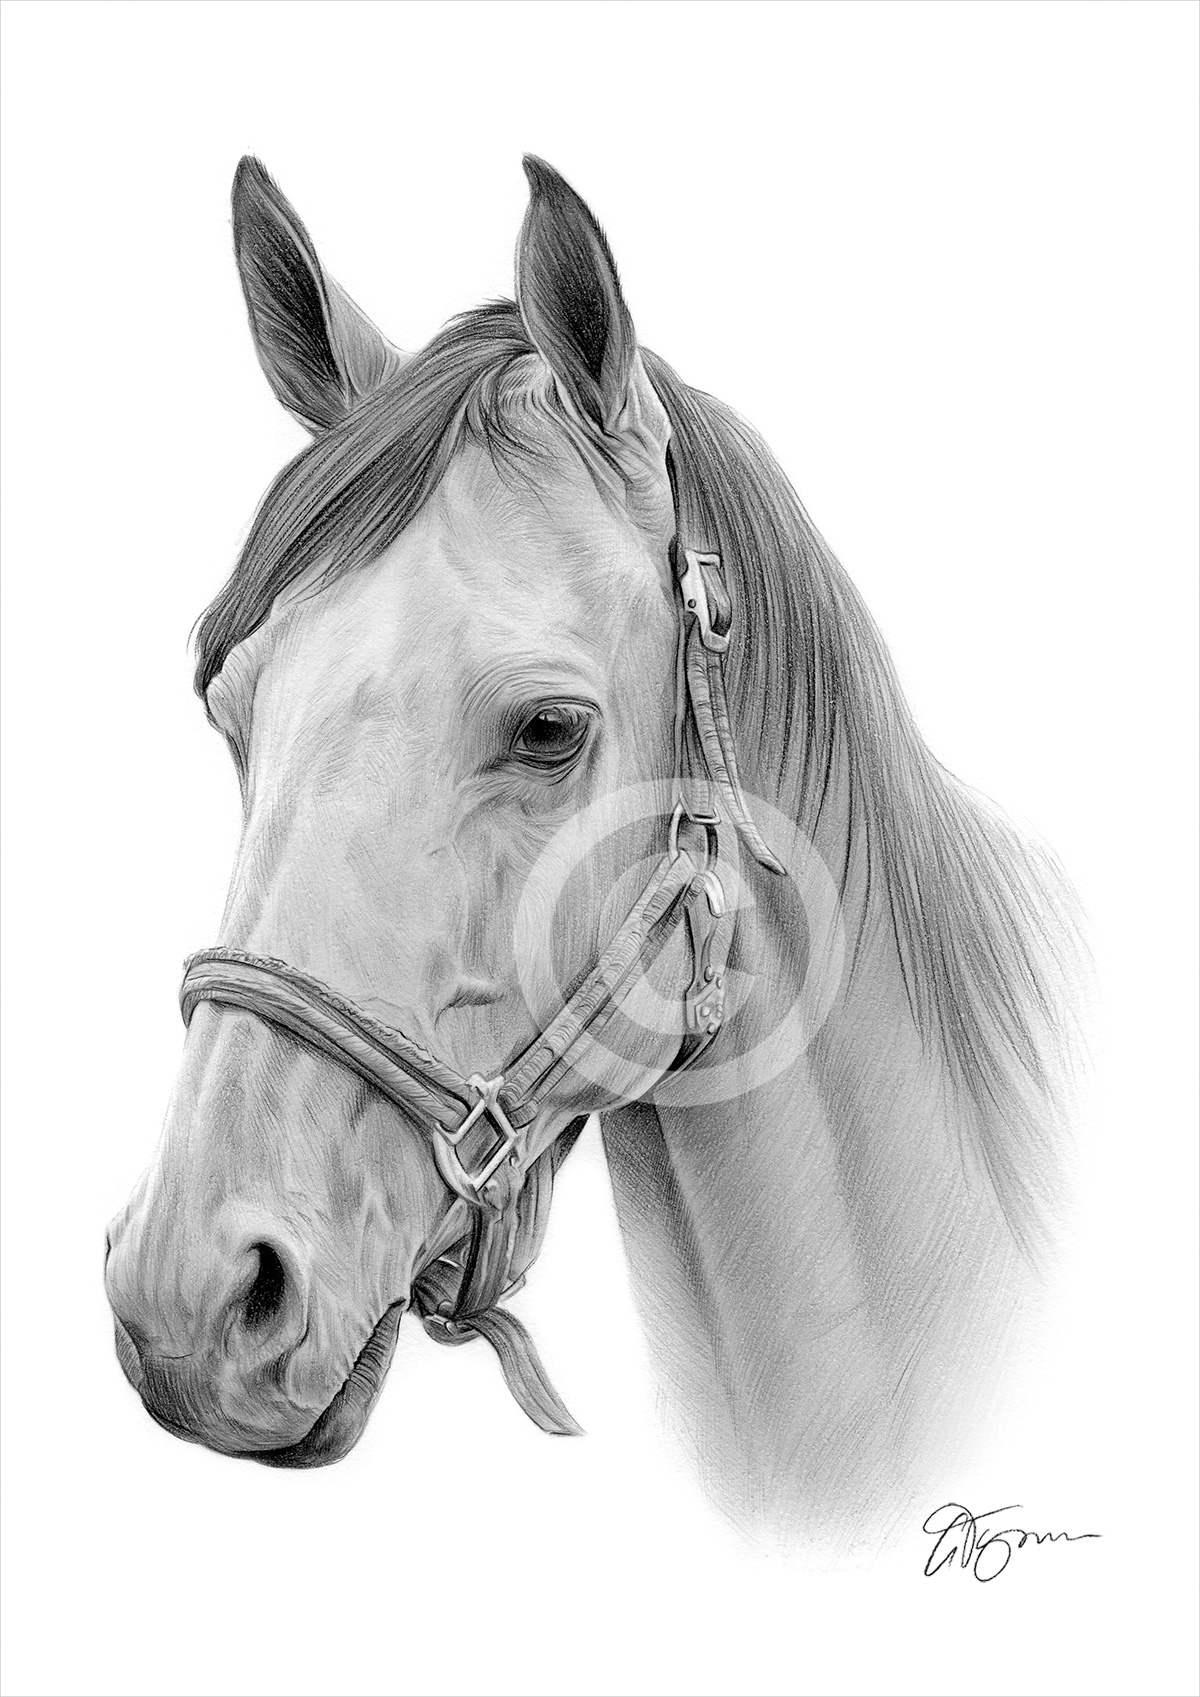 Pencil drawing of a horse by artist Gary Tymon